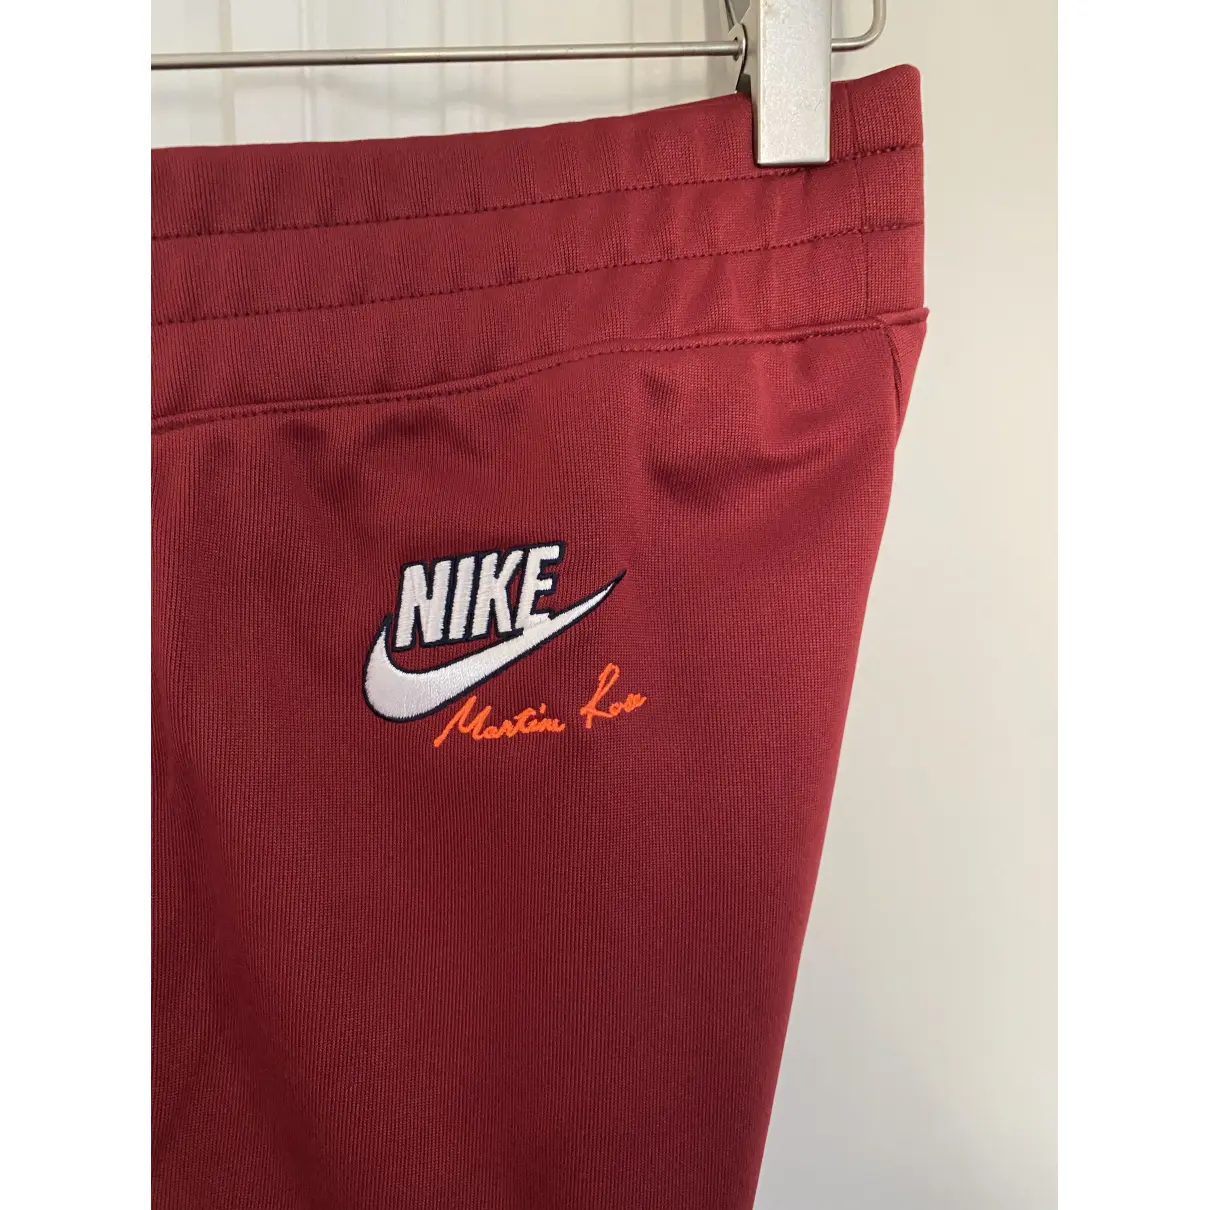 Buy NIKE X MARTINE ROSE Trousers online